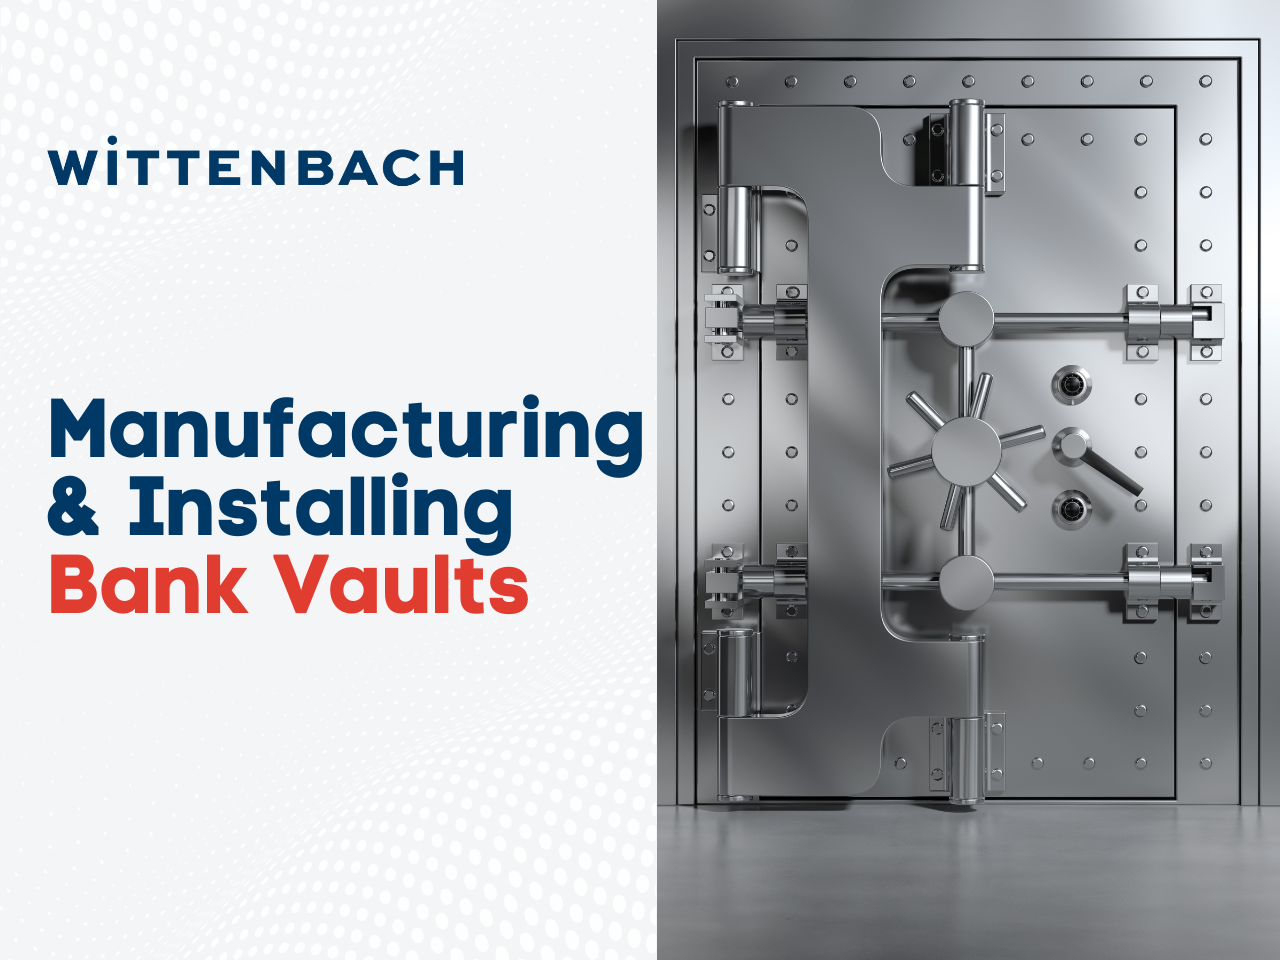 Installing vaults is a significant event in the life of your branch.